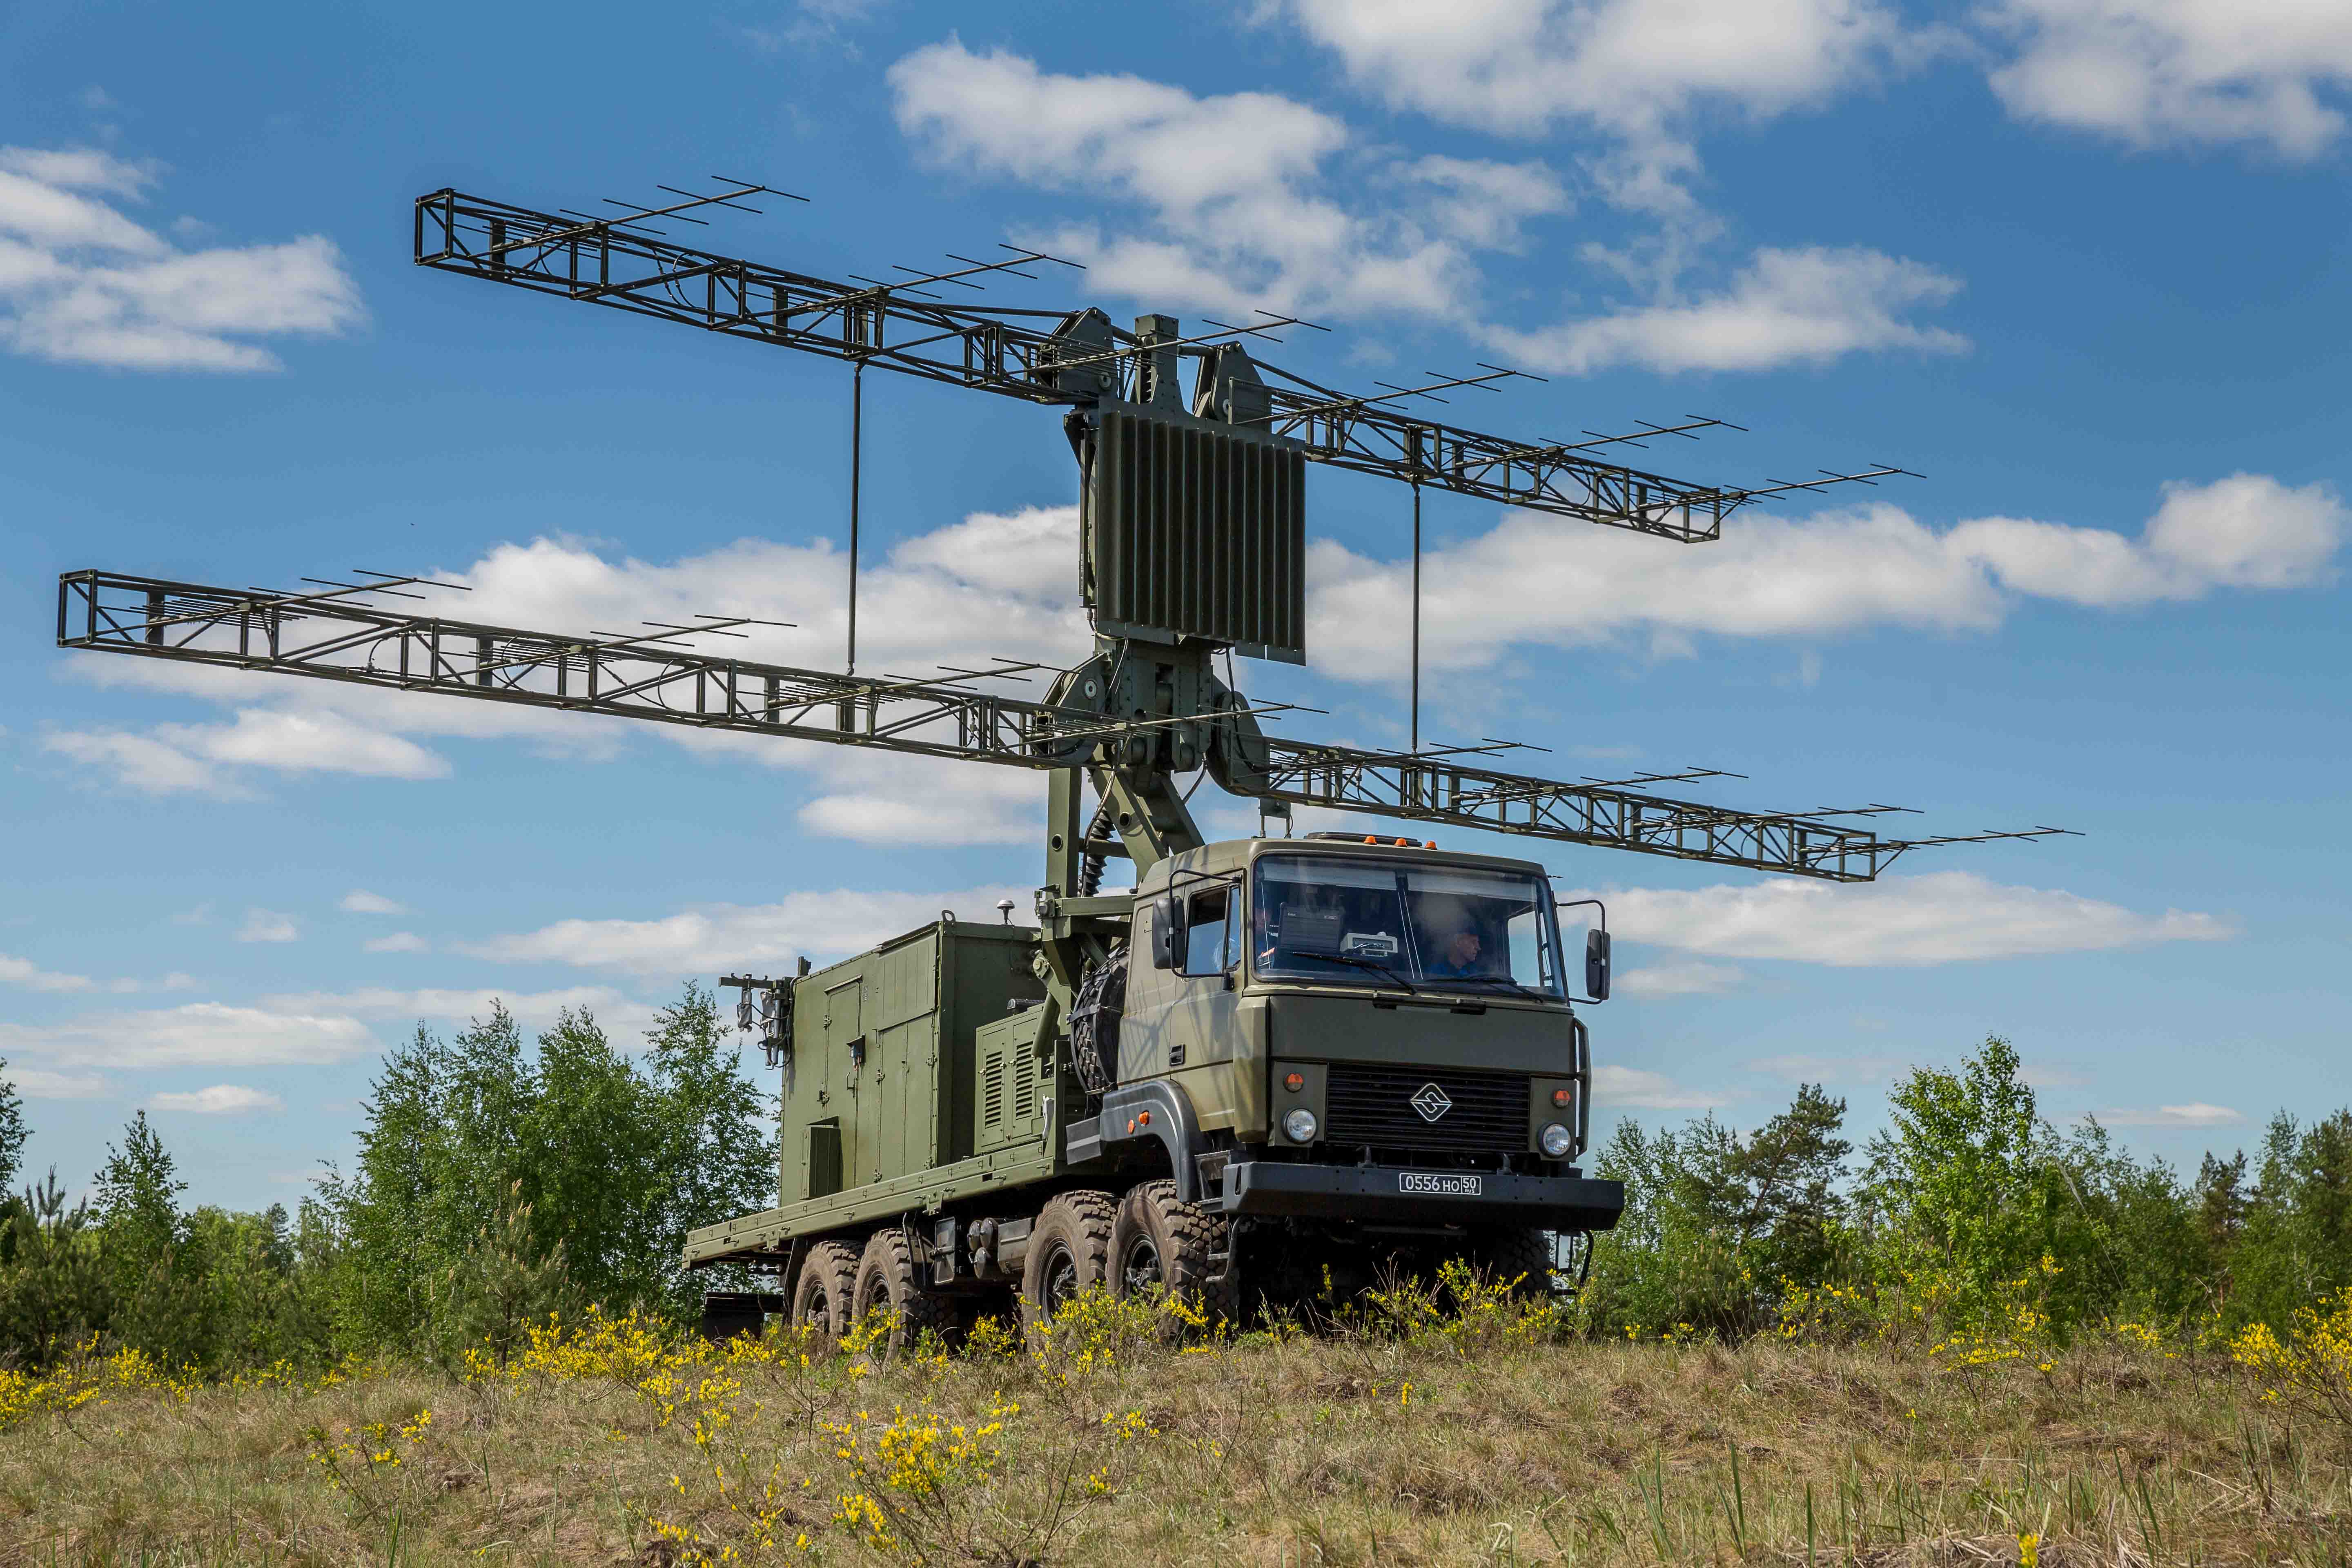 Rosoboronexport Offers Mobile Radar to Detect Stealth Aircraft